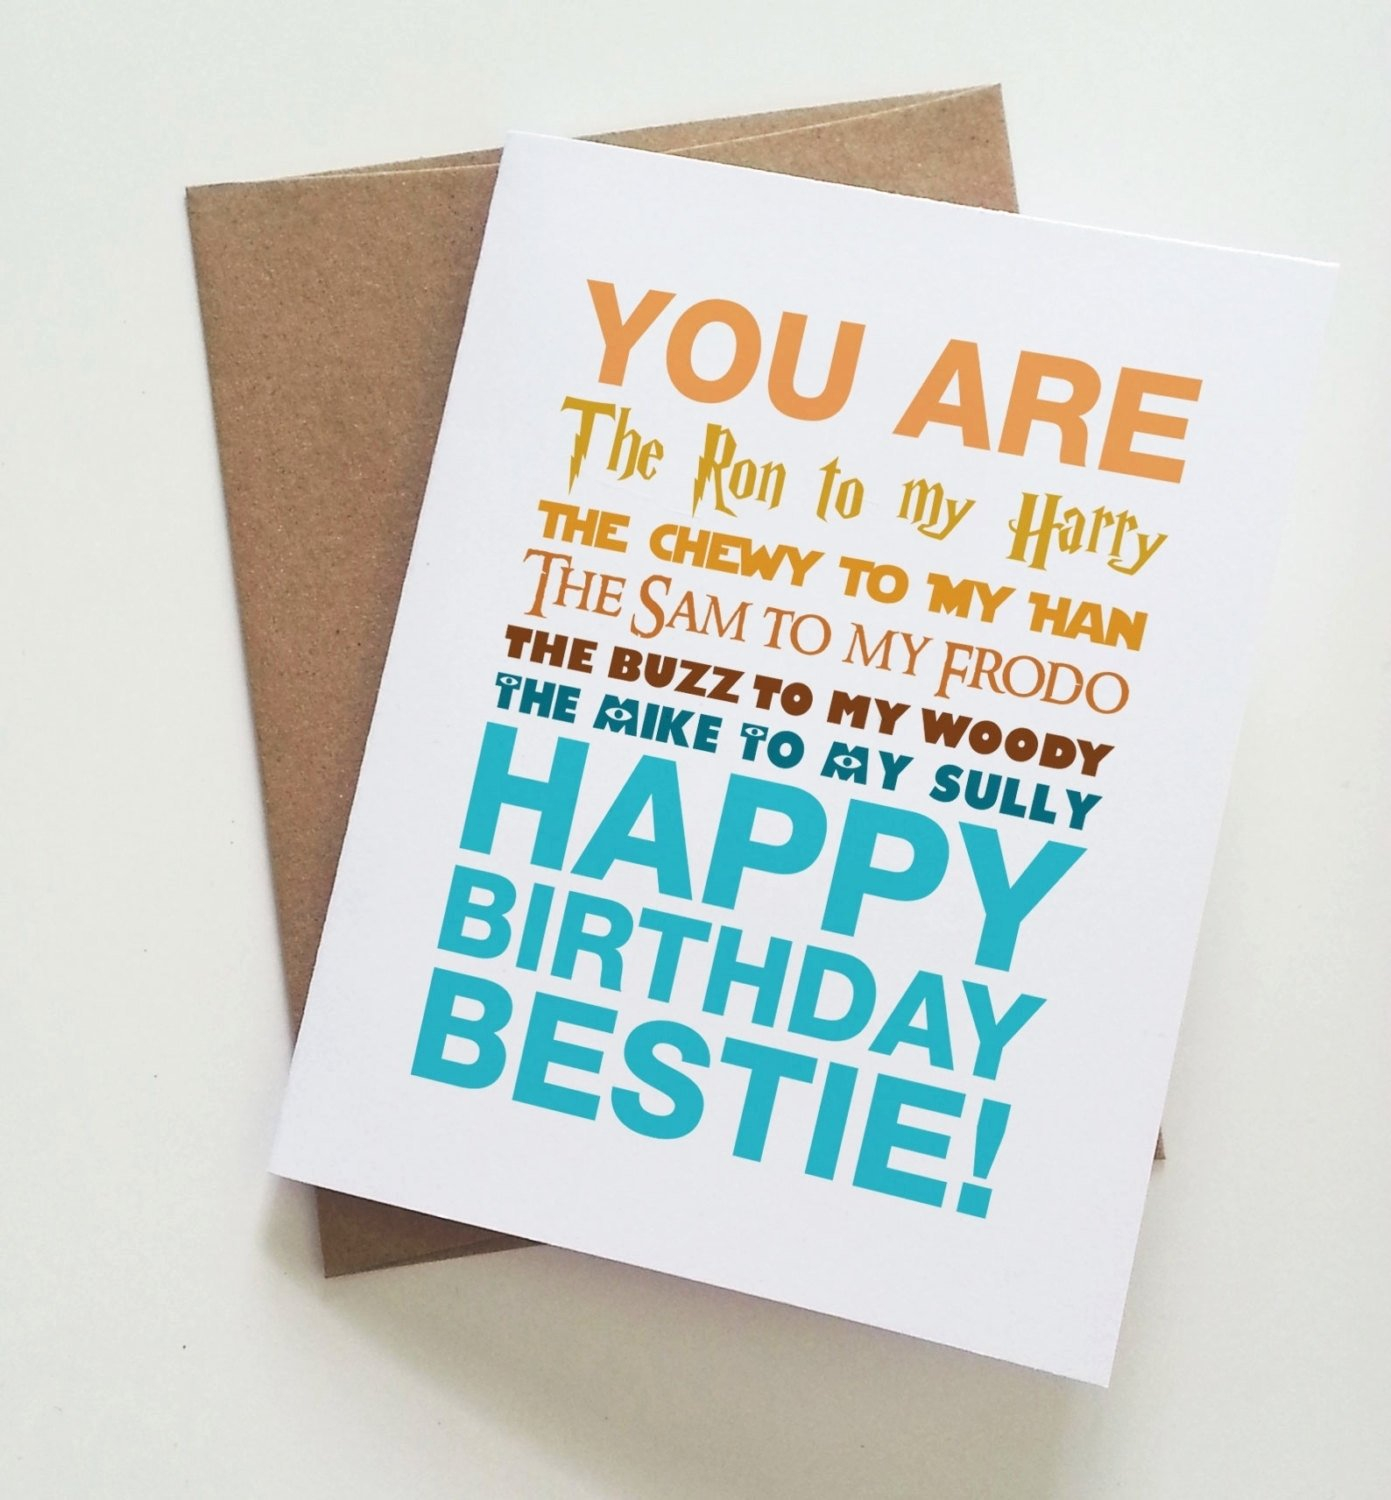 Ideas To Make A Birthday Card For A Best Friend Birthday Card Making Ideas For Best Friend Homemade Bday Cards For